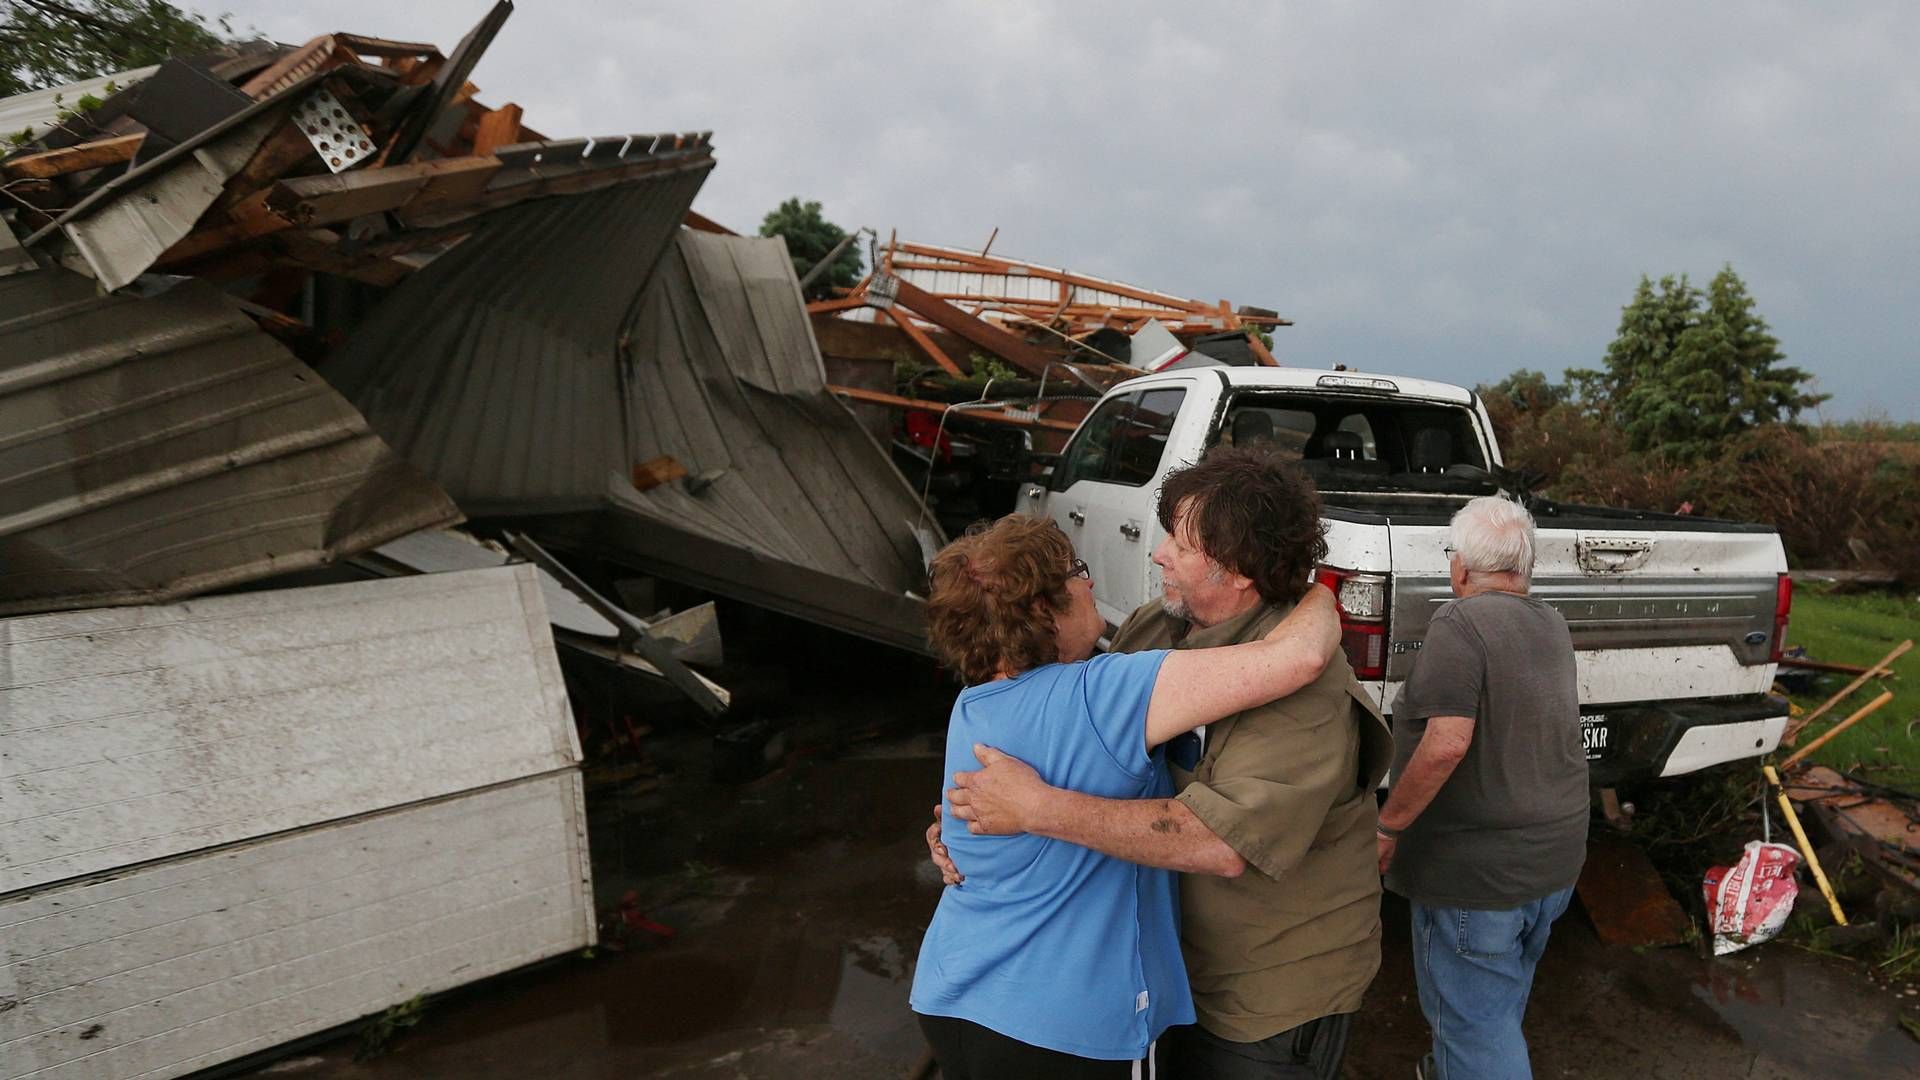 The tornadoes have claimed lives and caused significant property damage in Iowa. | Photo: Nirmalendu Majumdar/ames Tribune